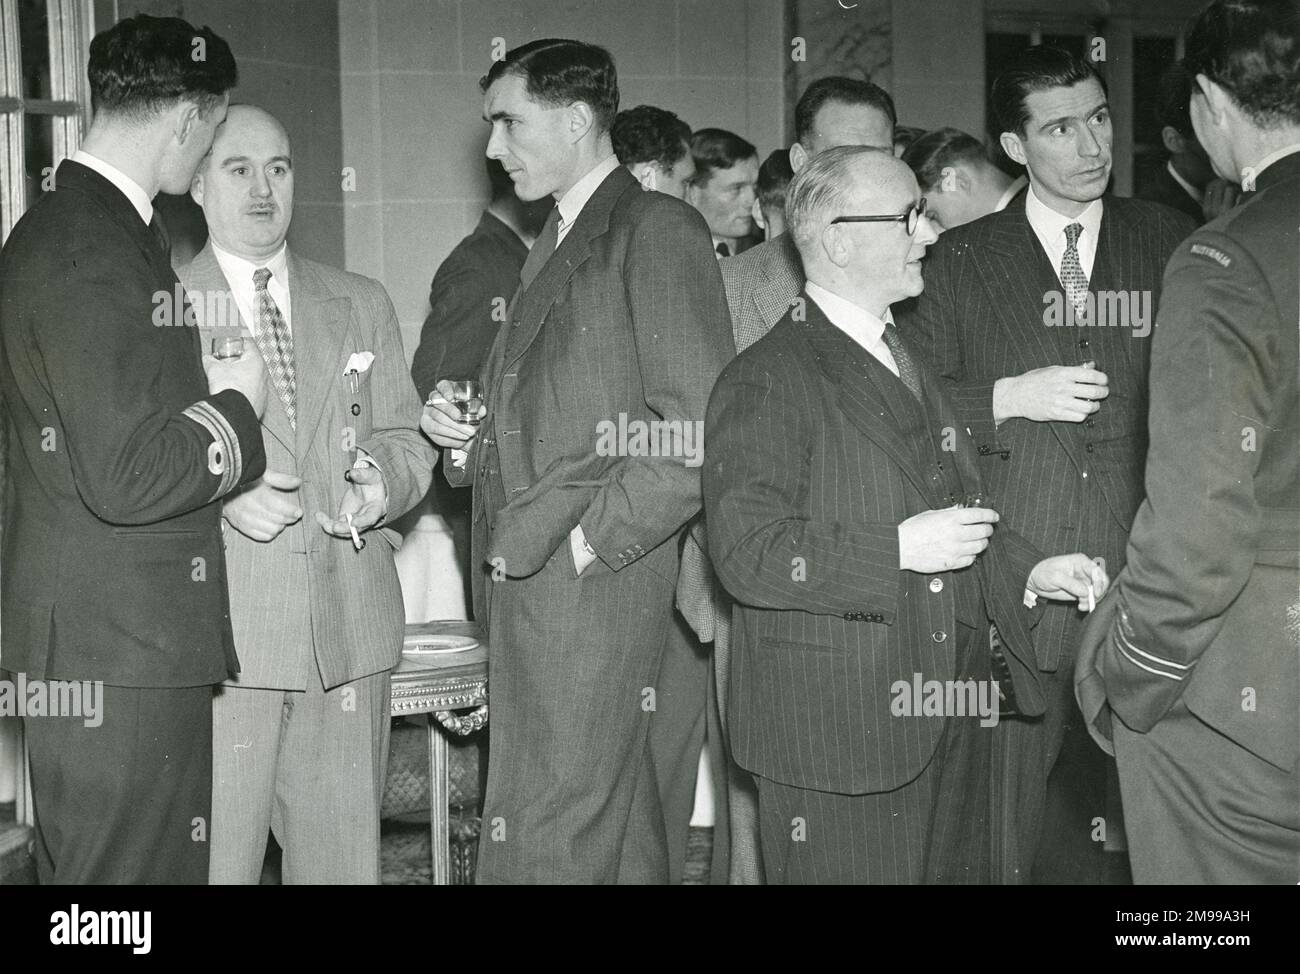 Students from No 6 Course Empire Test Pilots?s School toured the Avro factories on 15 and 16 December 1947 when they completed a series of visits to the aircraft manufacturers. Enjoying a cocktail before dinner are, from left: Lt Cdr G. Hawkes, RN; F.V. Smith, CBE, General Works Manager; Cdr F.M.A. Torrens-Spence, DSO, DSC, RN, OC Flying at the School; C.E. Fielding, OBE, Director; and J.A.R. Kay, Sales Manager. Stock Photo